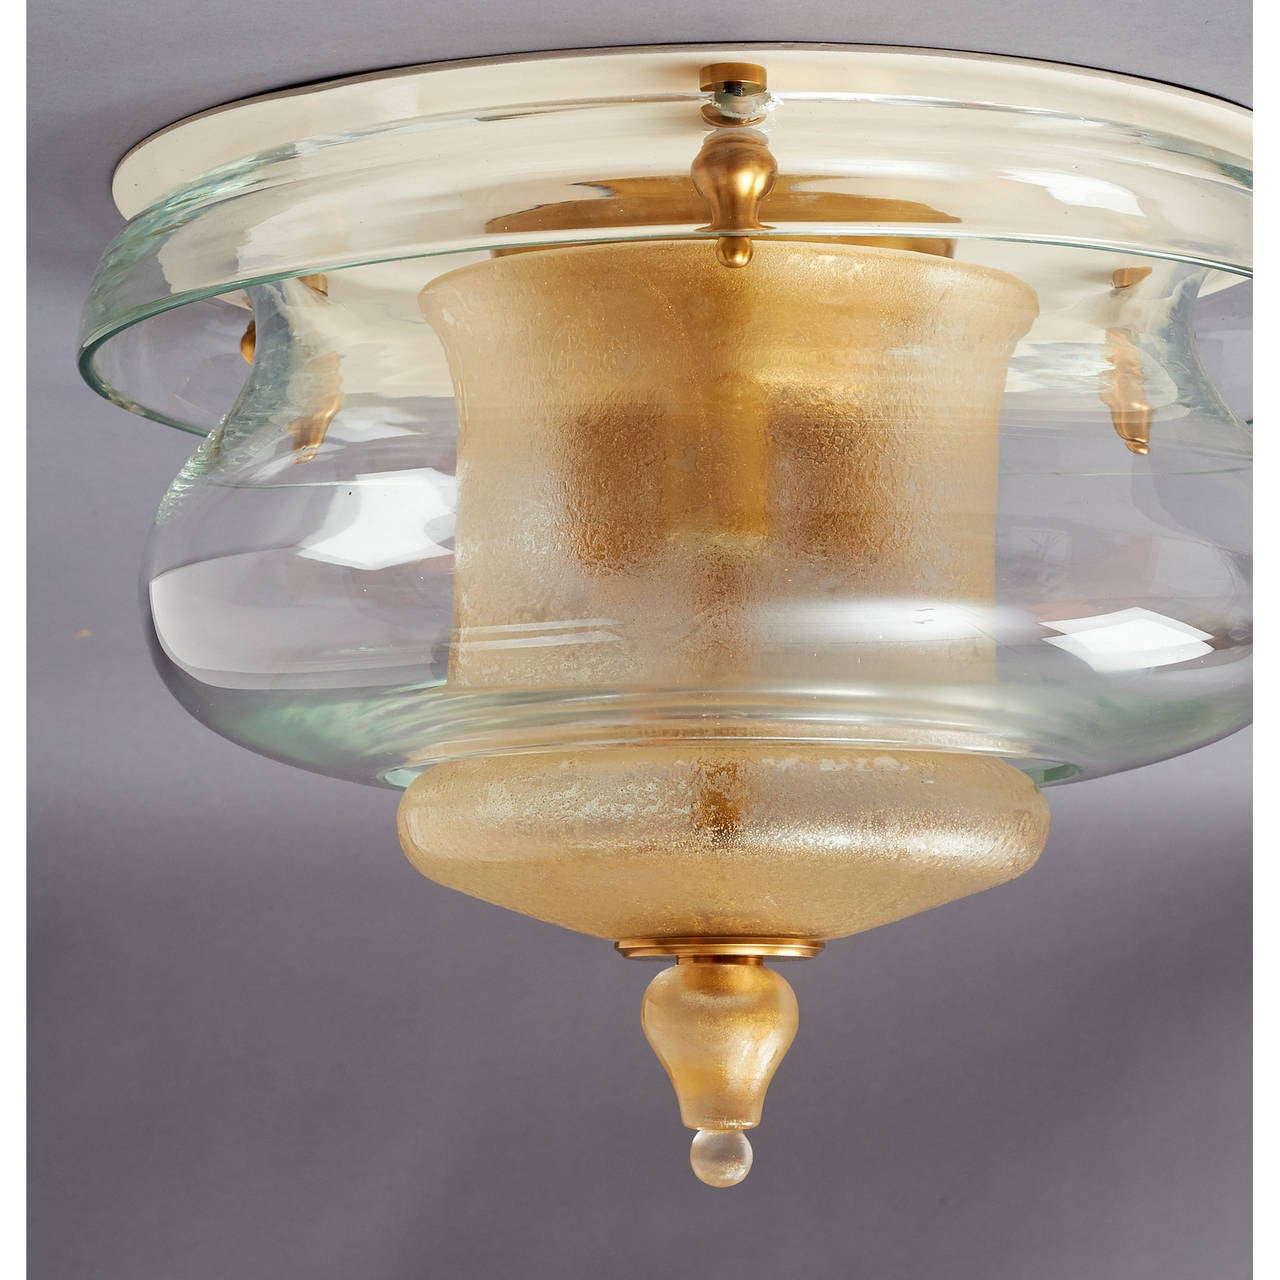 Veronese.

Exquisite ceiling light fixture.
Clear blown glass with gold flecked and acid washed central shade and finial.
Brass mounts.
Italy, circa 1950.

Measures: 14 diameter x 11 height.

Rewired for use in the U.S (3 bulbs).